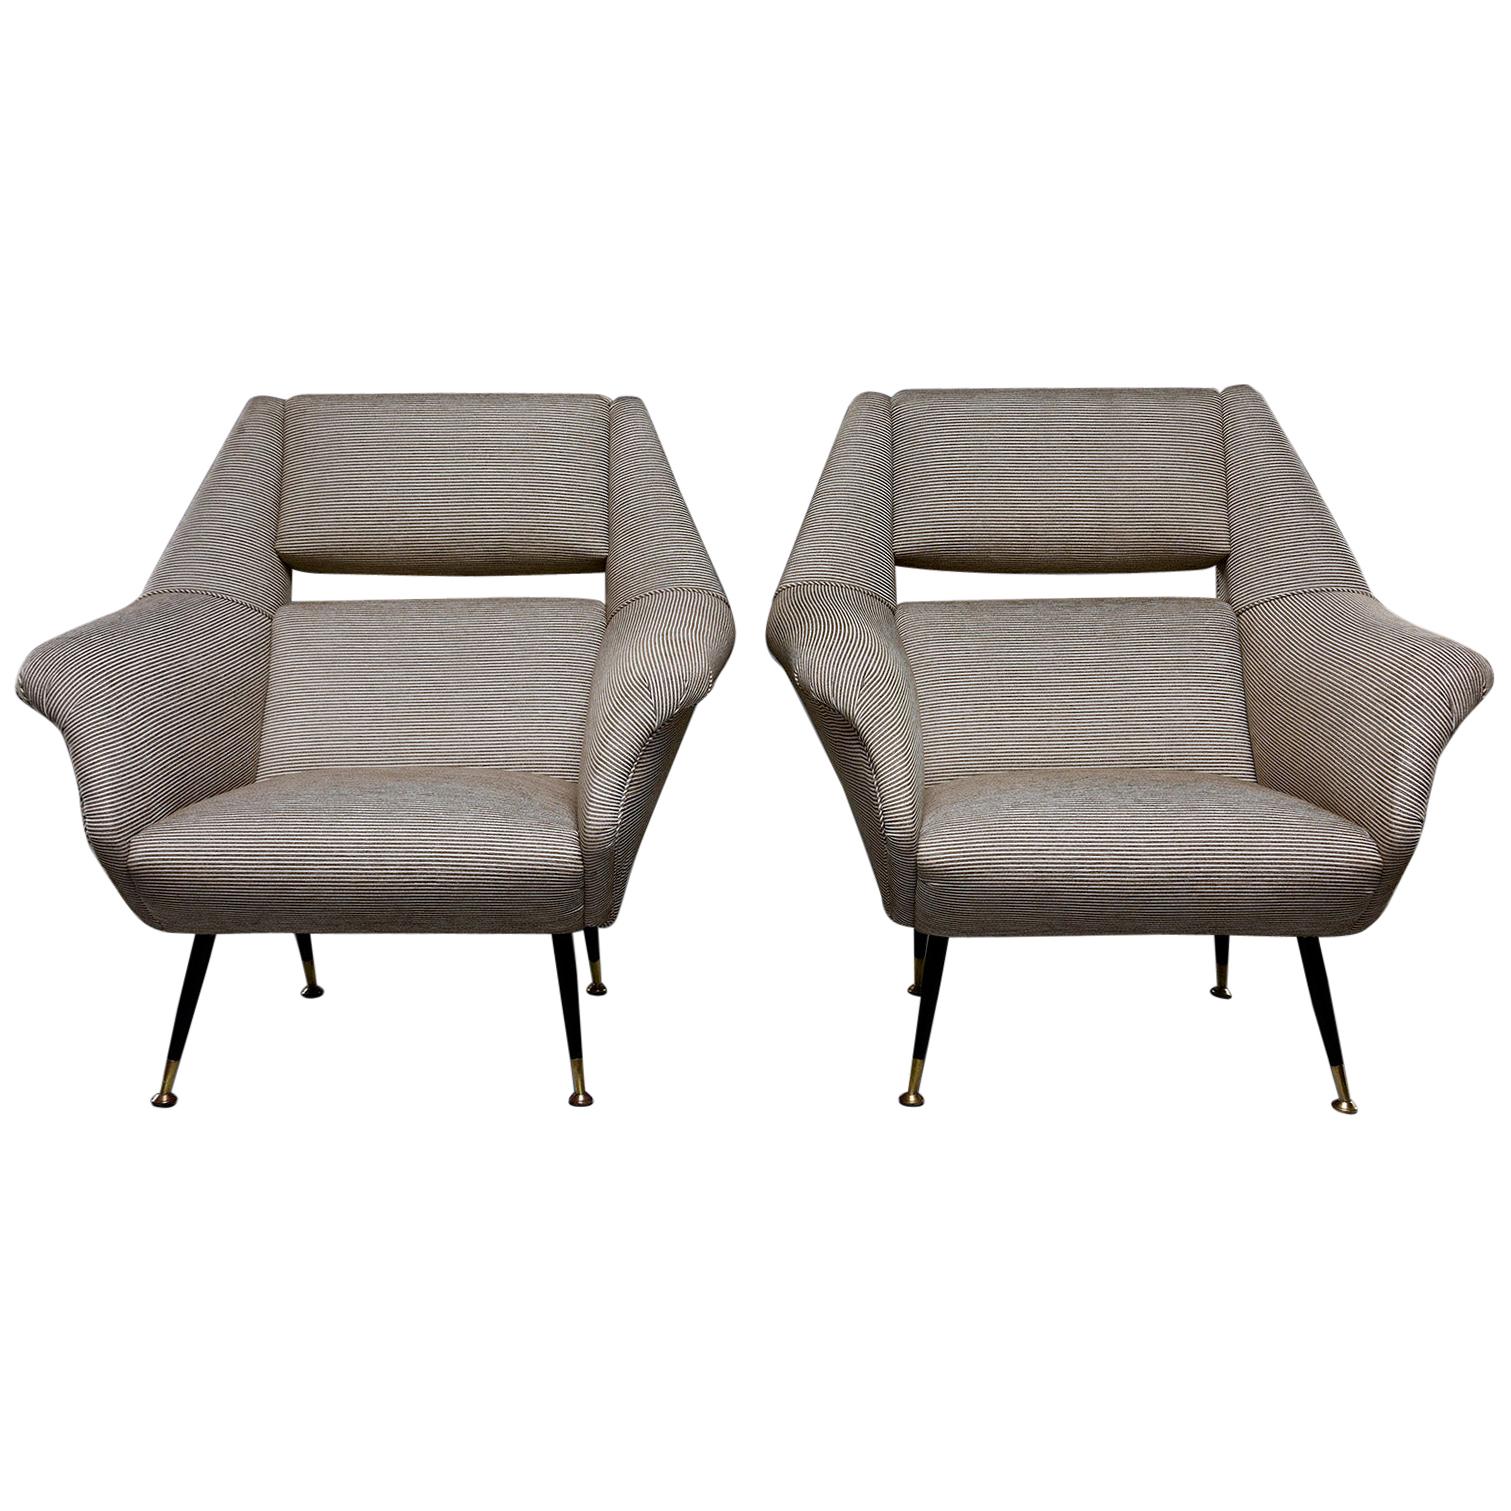 Pair of Newly Upholstered Midcentury Chairs by Gigi Radice for Minotti